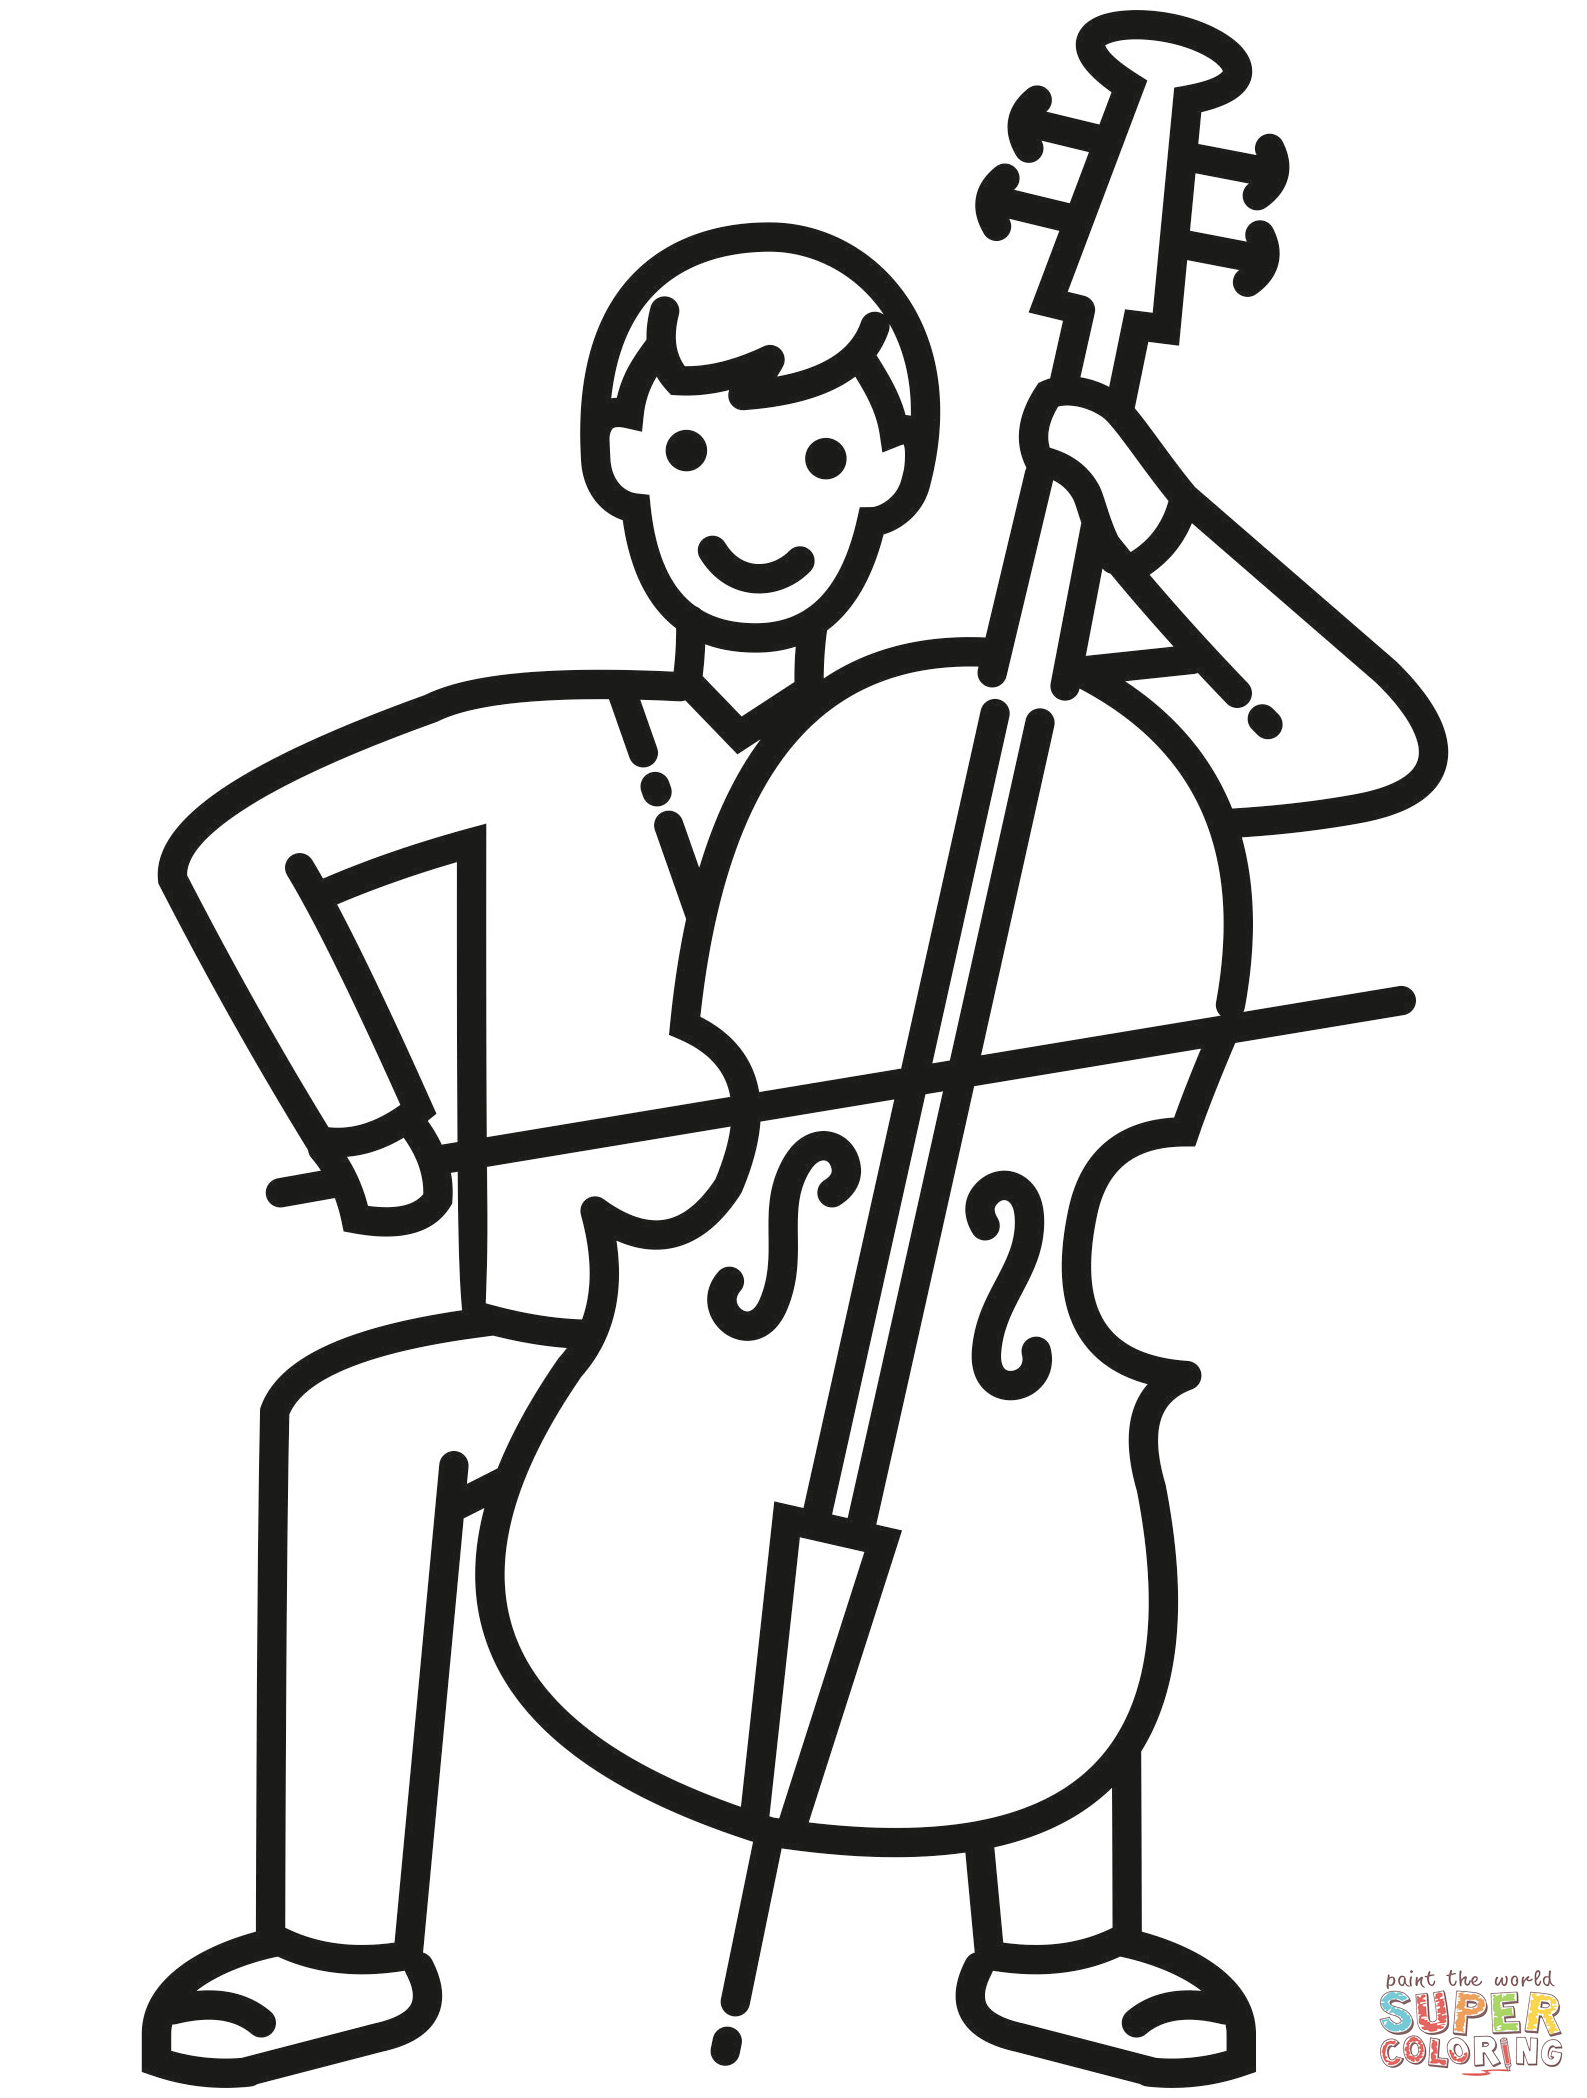 Cellist coloring page free printable coloring pages